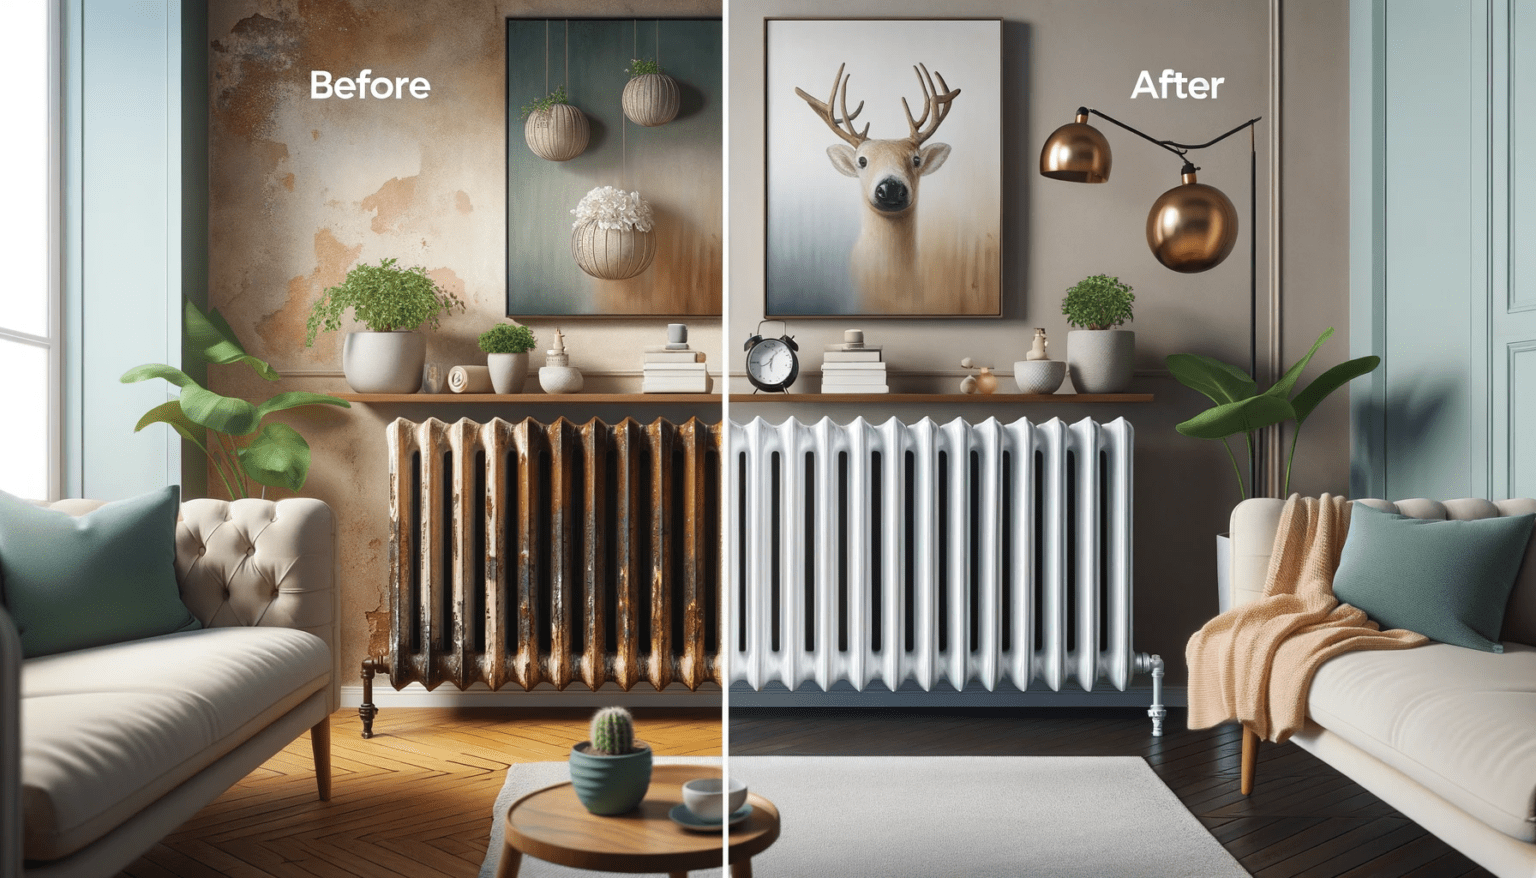 How To Repaint A Radiator ? Before And After Photos Of A Radiator, Showing The Transformation From Old And Worn To Freshly Painted And Stylish